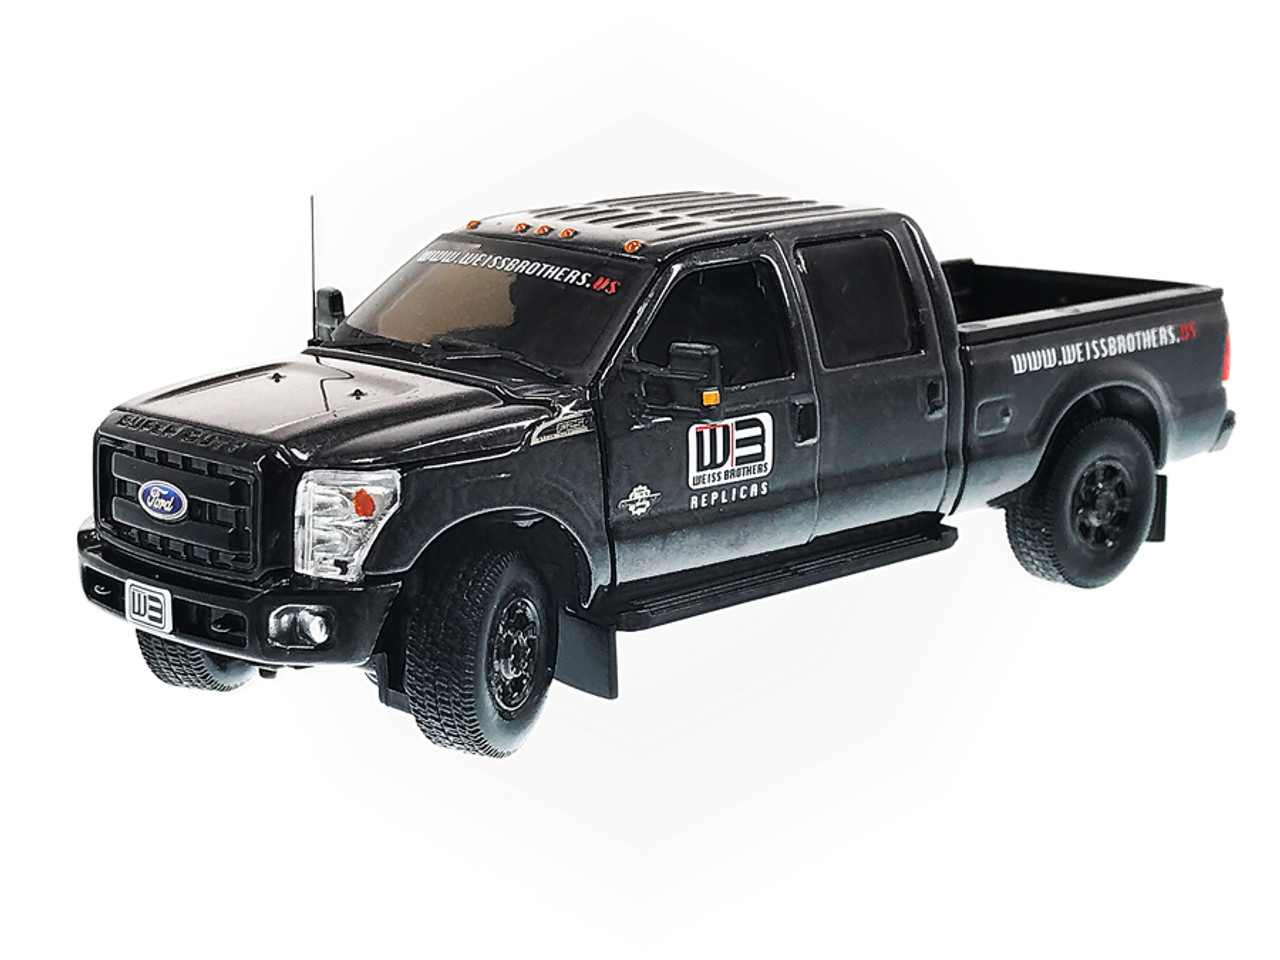 Ford F-250 Crew Cab diecast scale model - Weiss Brothers